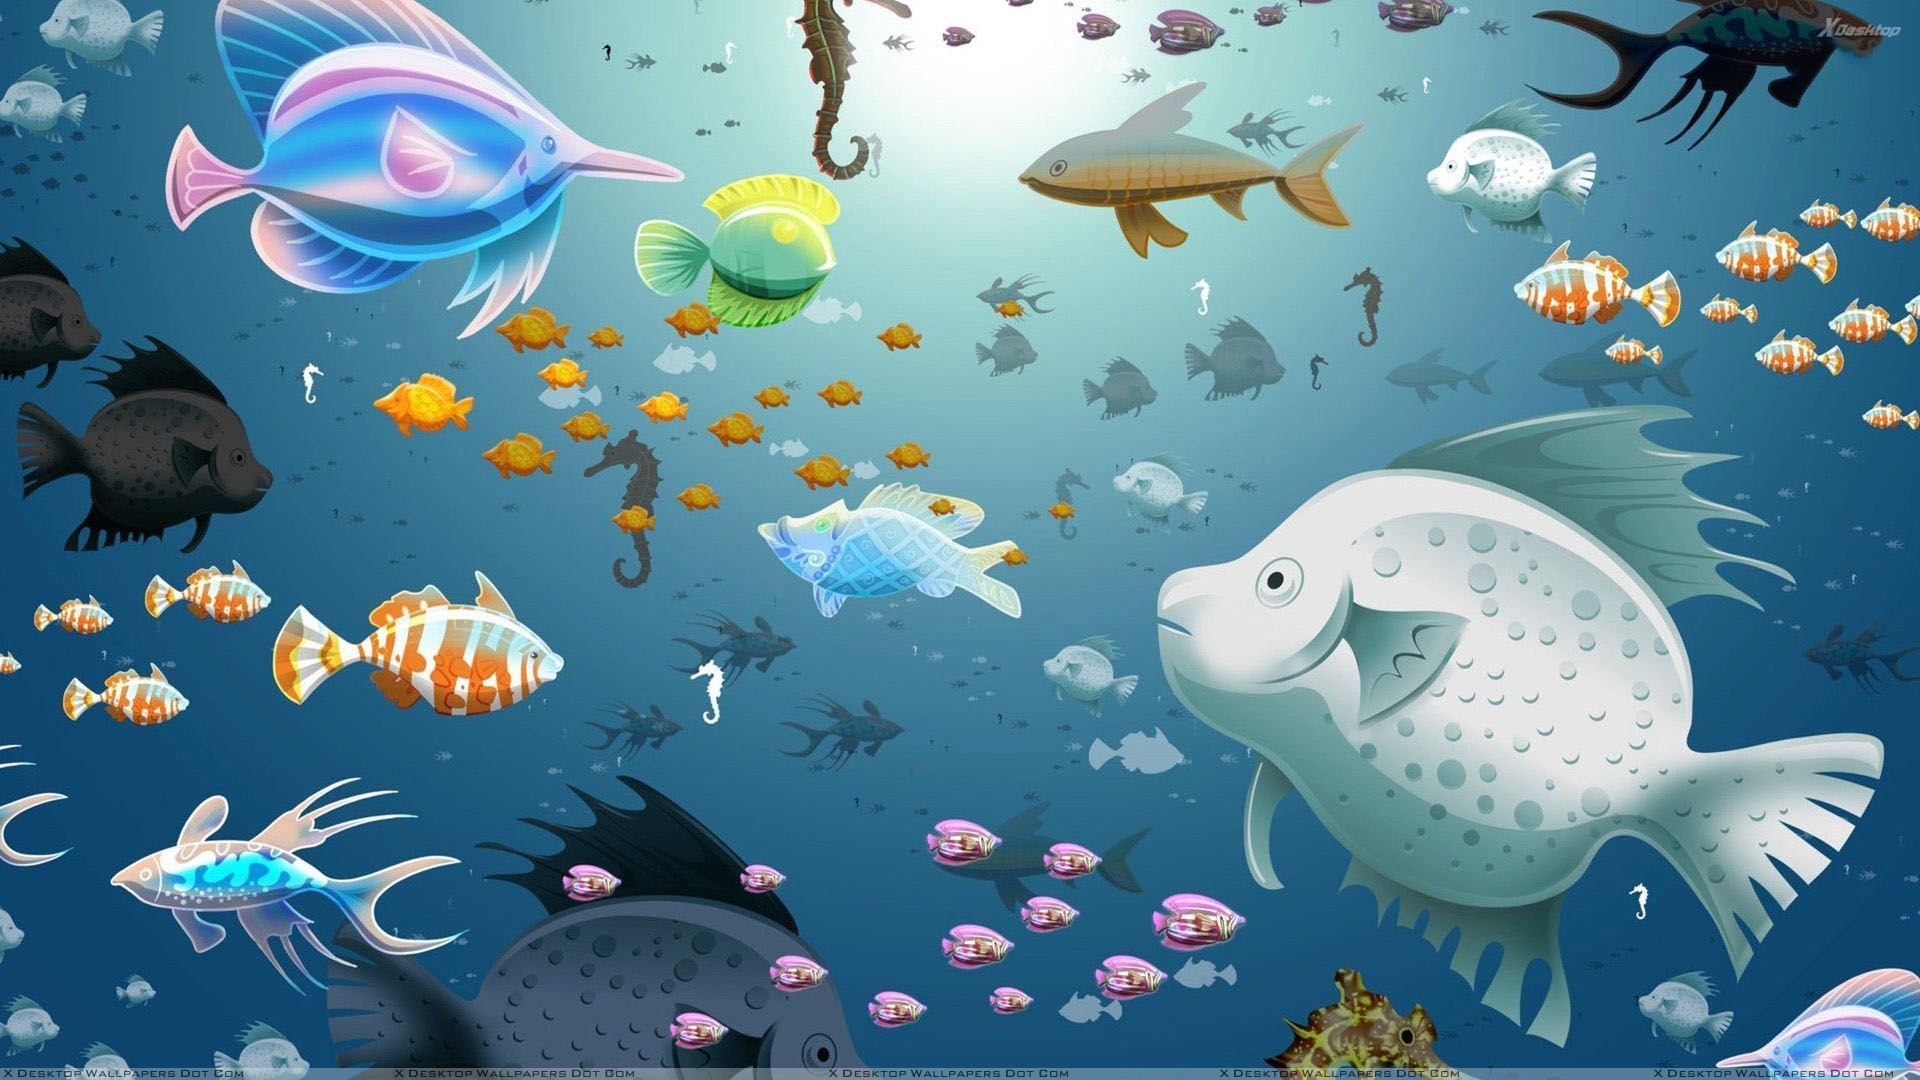 Free download Artistic Colorful Fish In Water Wallpaper 1920x1080